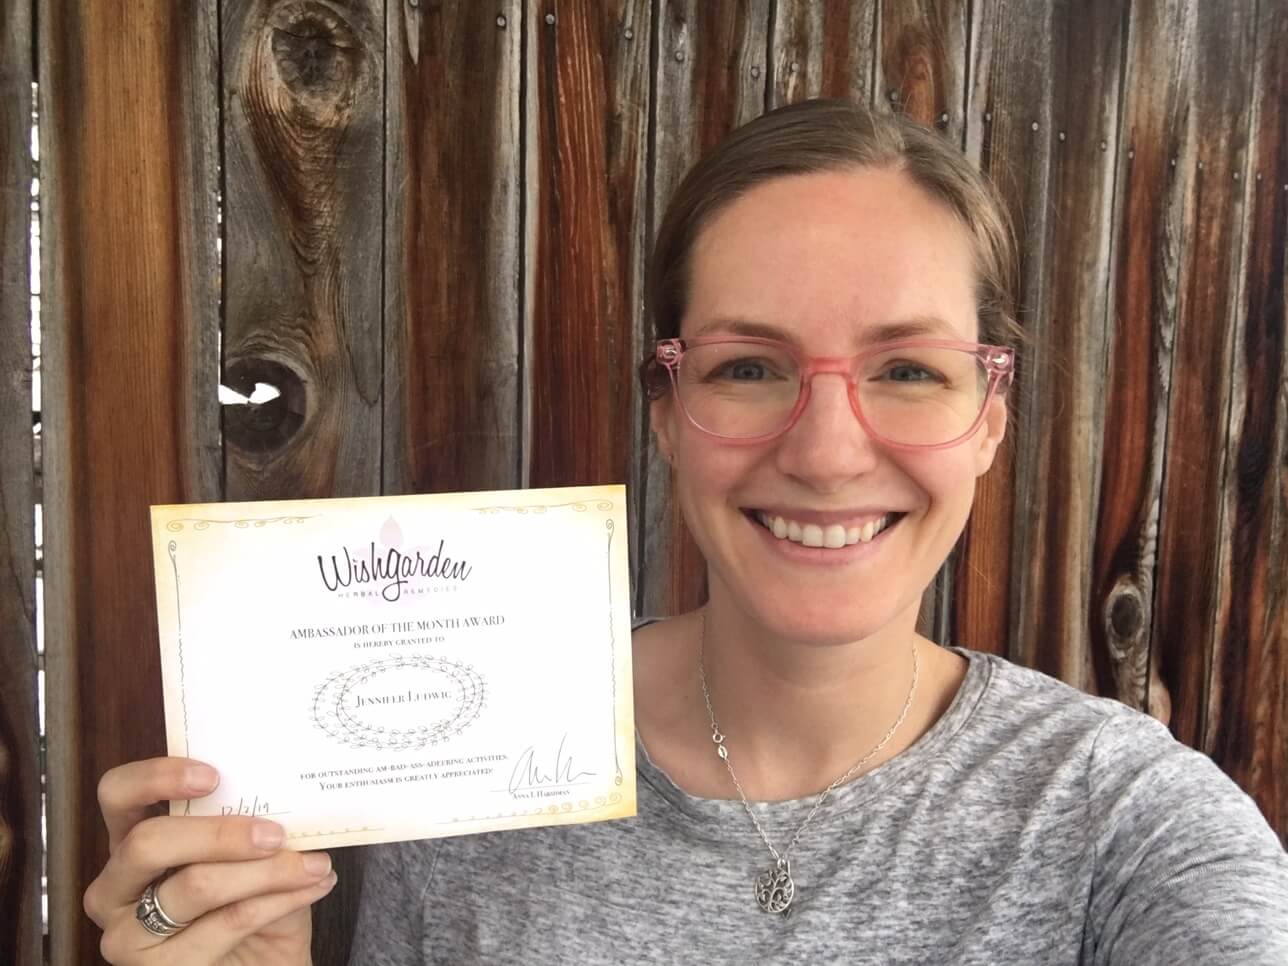 An Interview With Jenni Ludwig, WishGarden Ambassador Of The Month